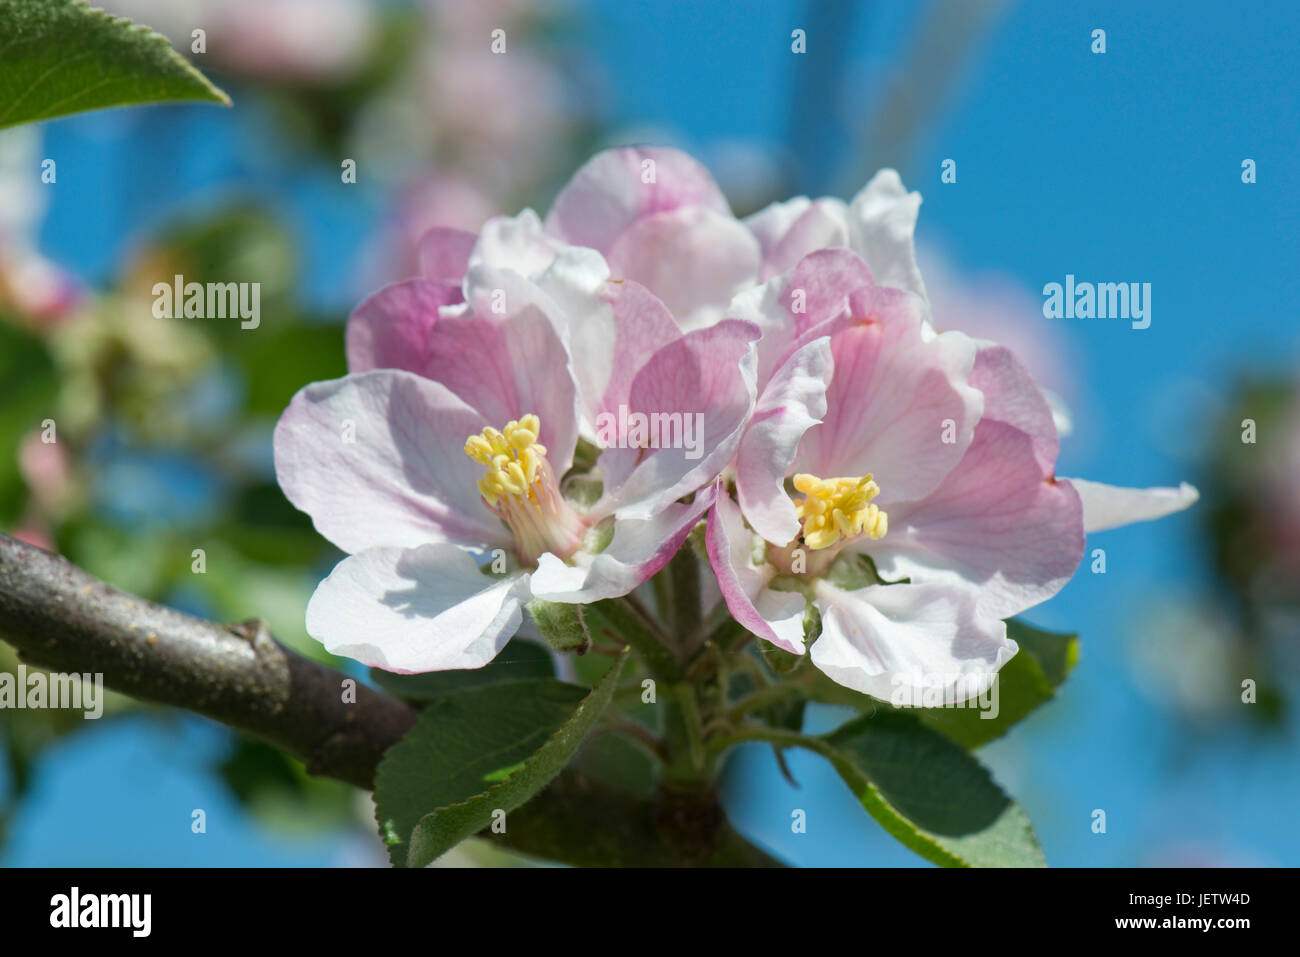 Pink white delicate apple flowers blooming on a fine spring day against a blue sky, Berkshire, May Stock Photo